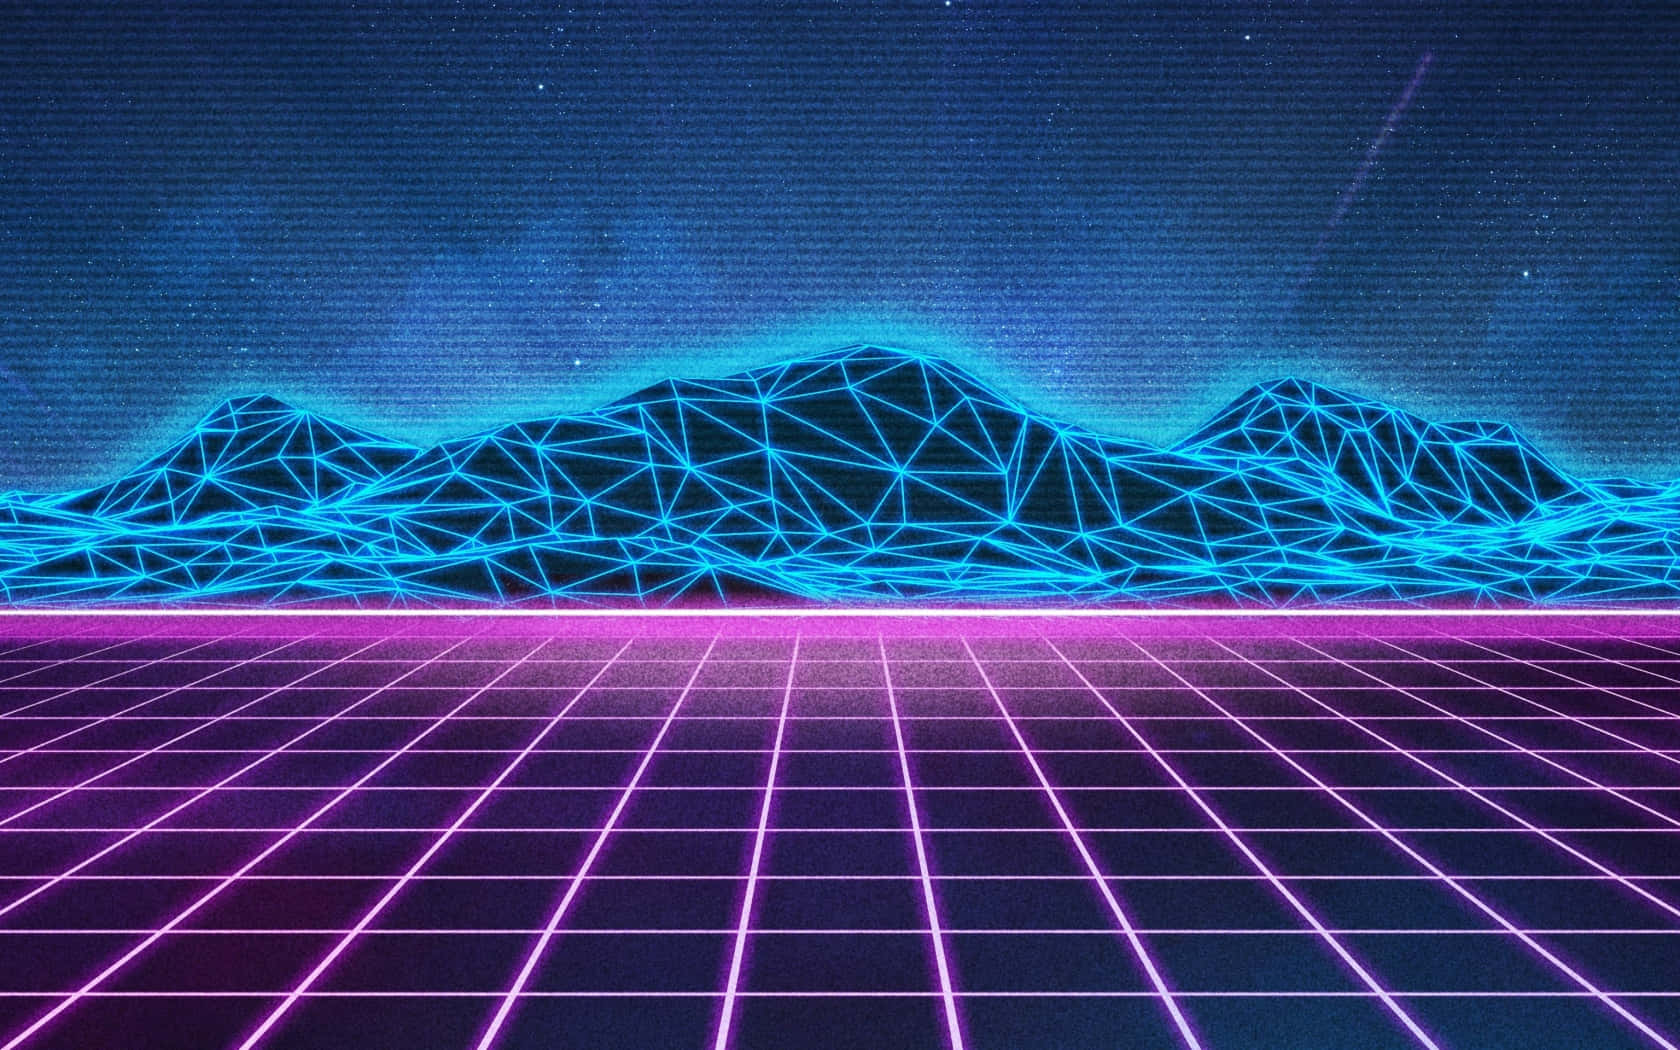 Take a ride through the skies of Retrowave